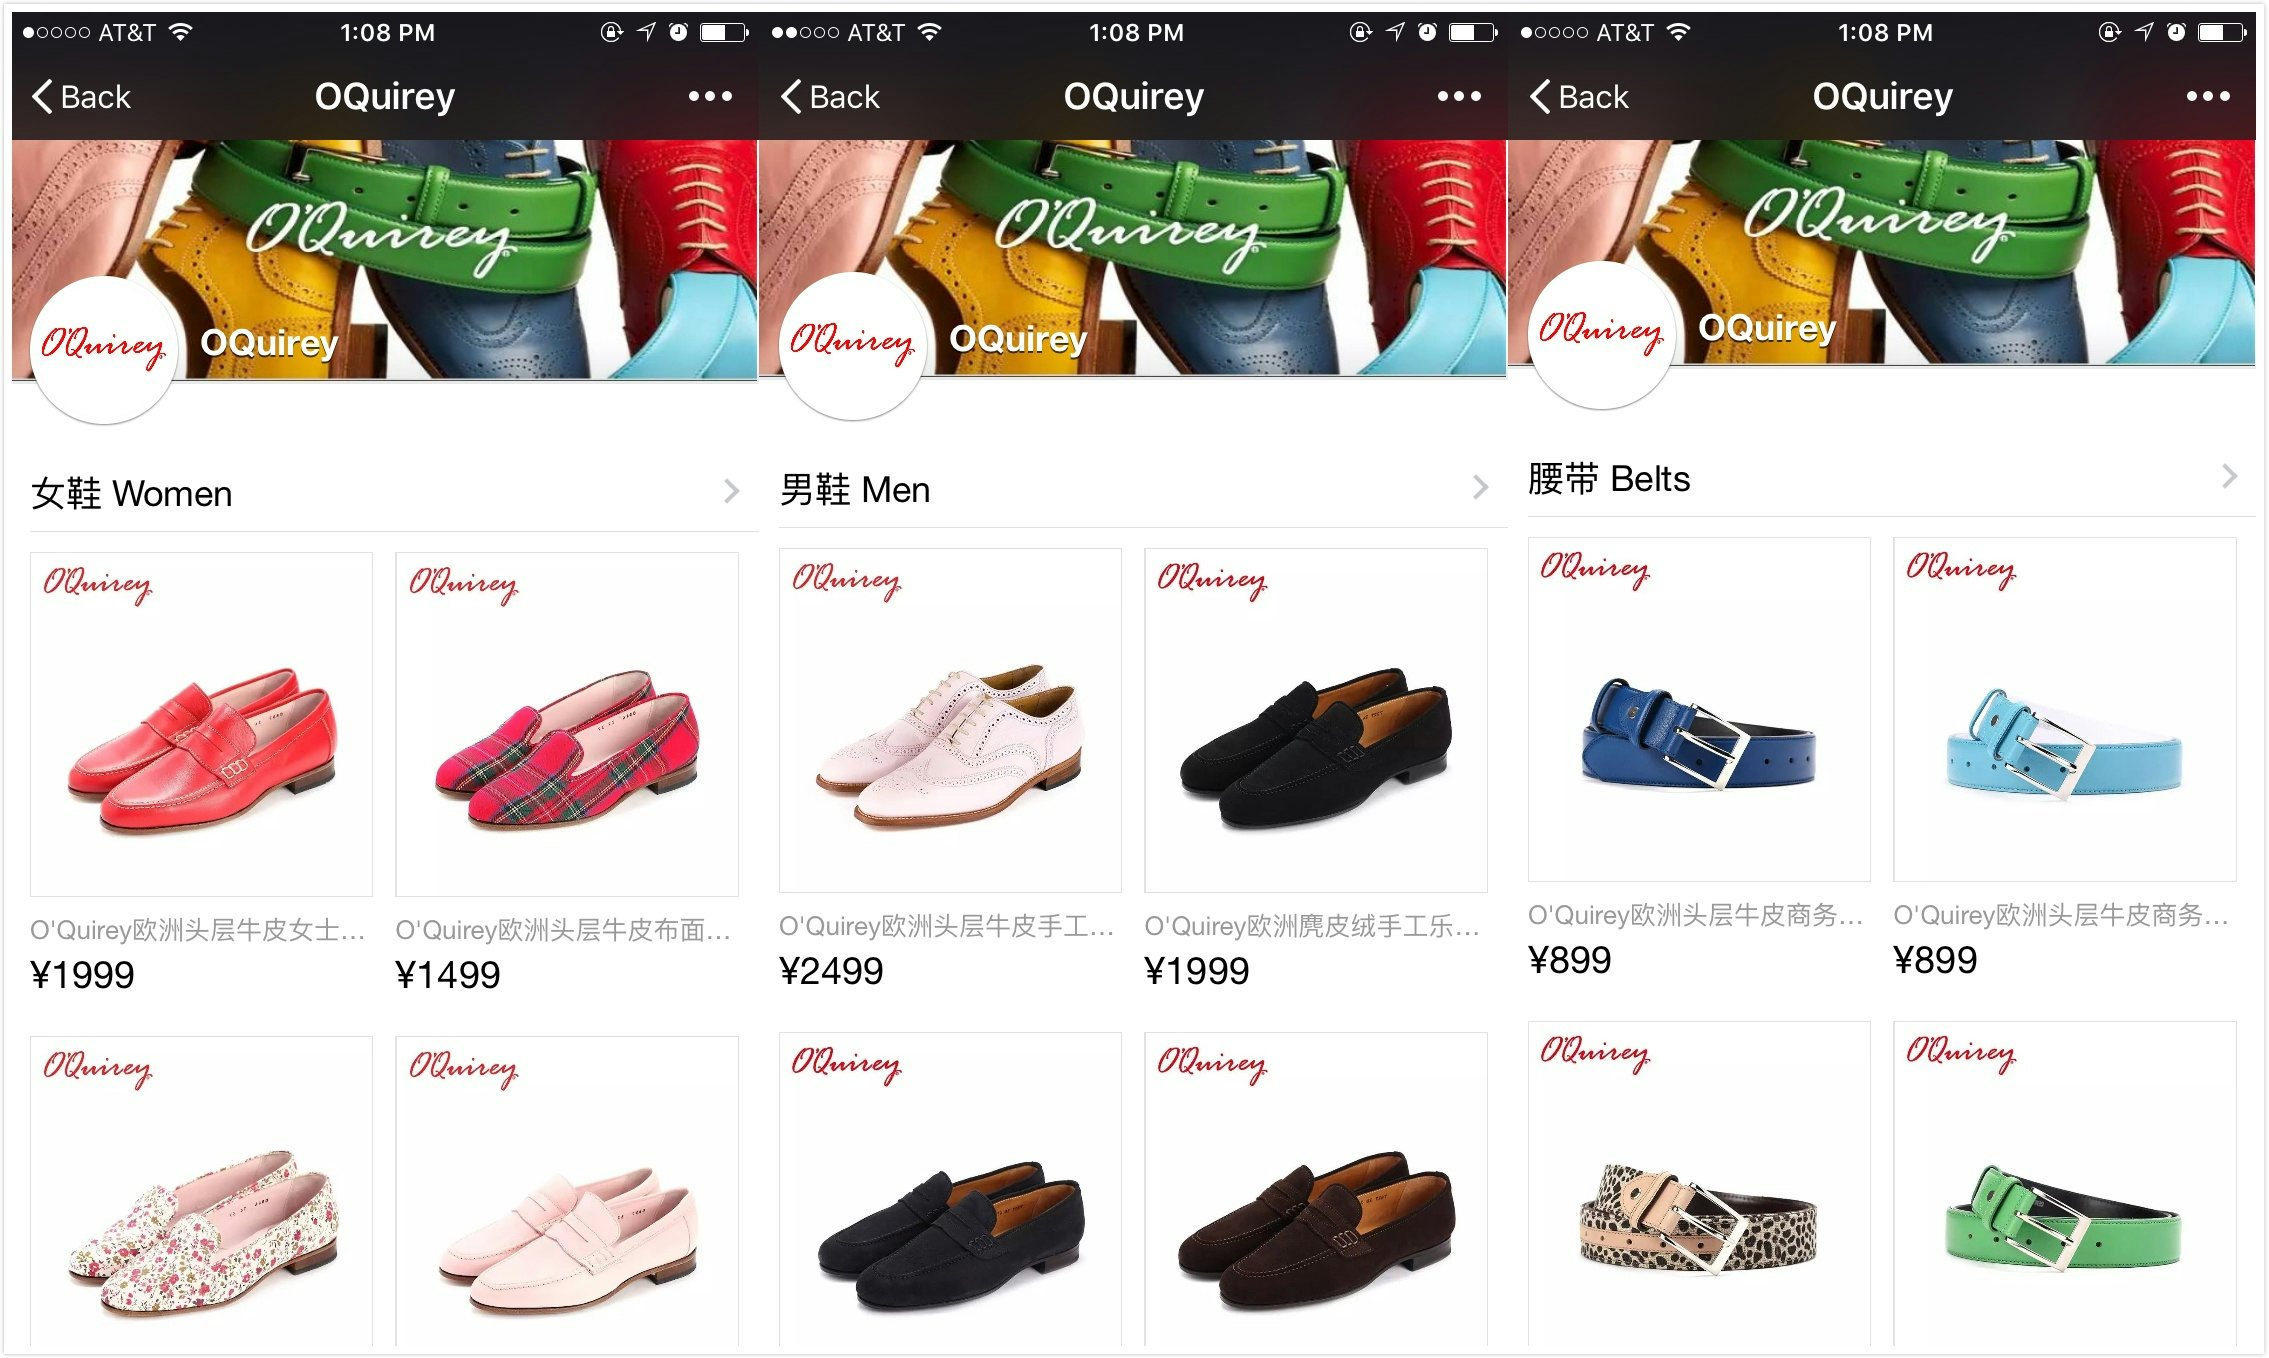 Dutch shoe brand O'Quirey saw a 30 percent growth in WeChat followers after launching its WeChat store in mid-February.